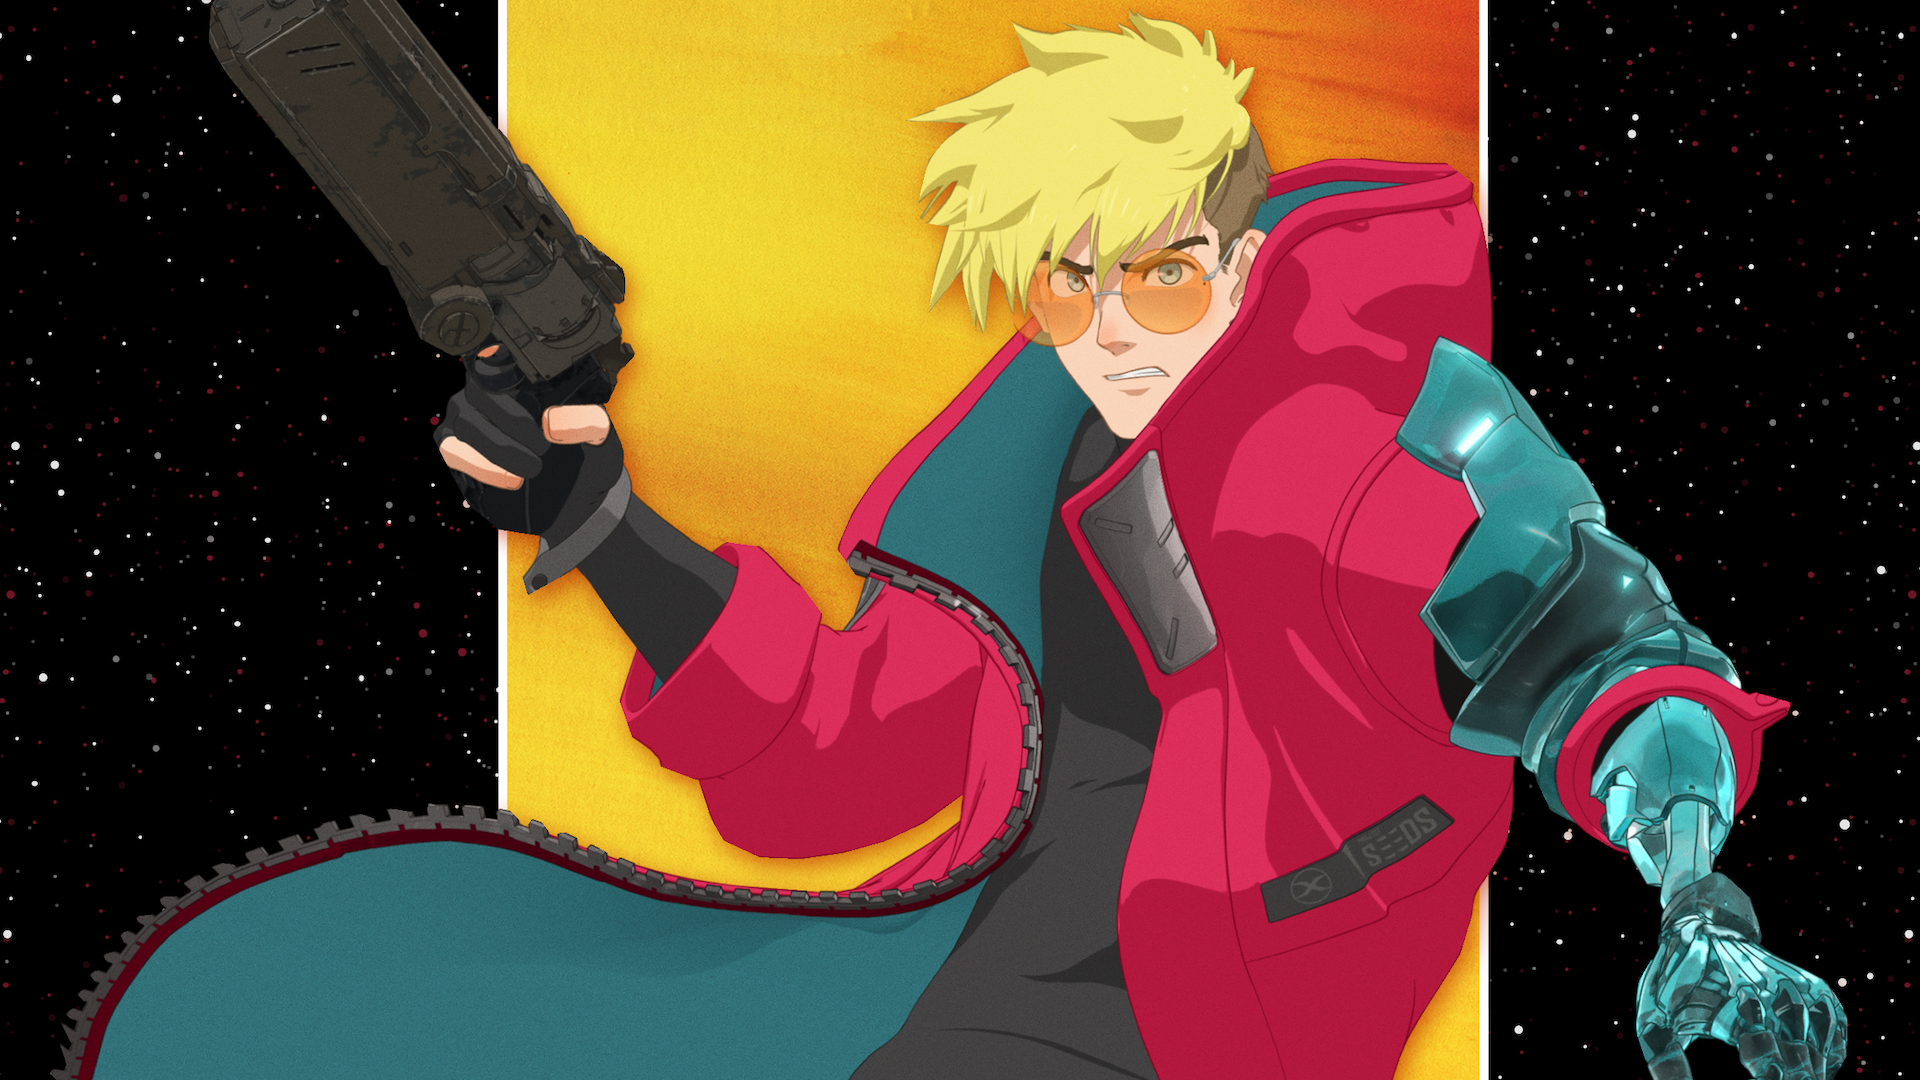 TRIGUN STAMPEDE Season 2: Announcement, Release Date, and More